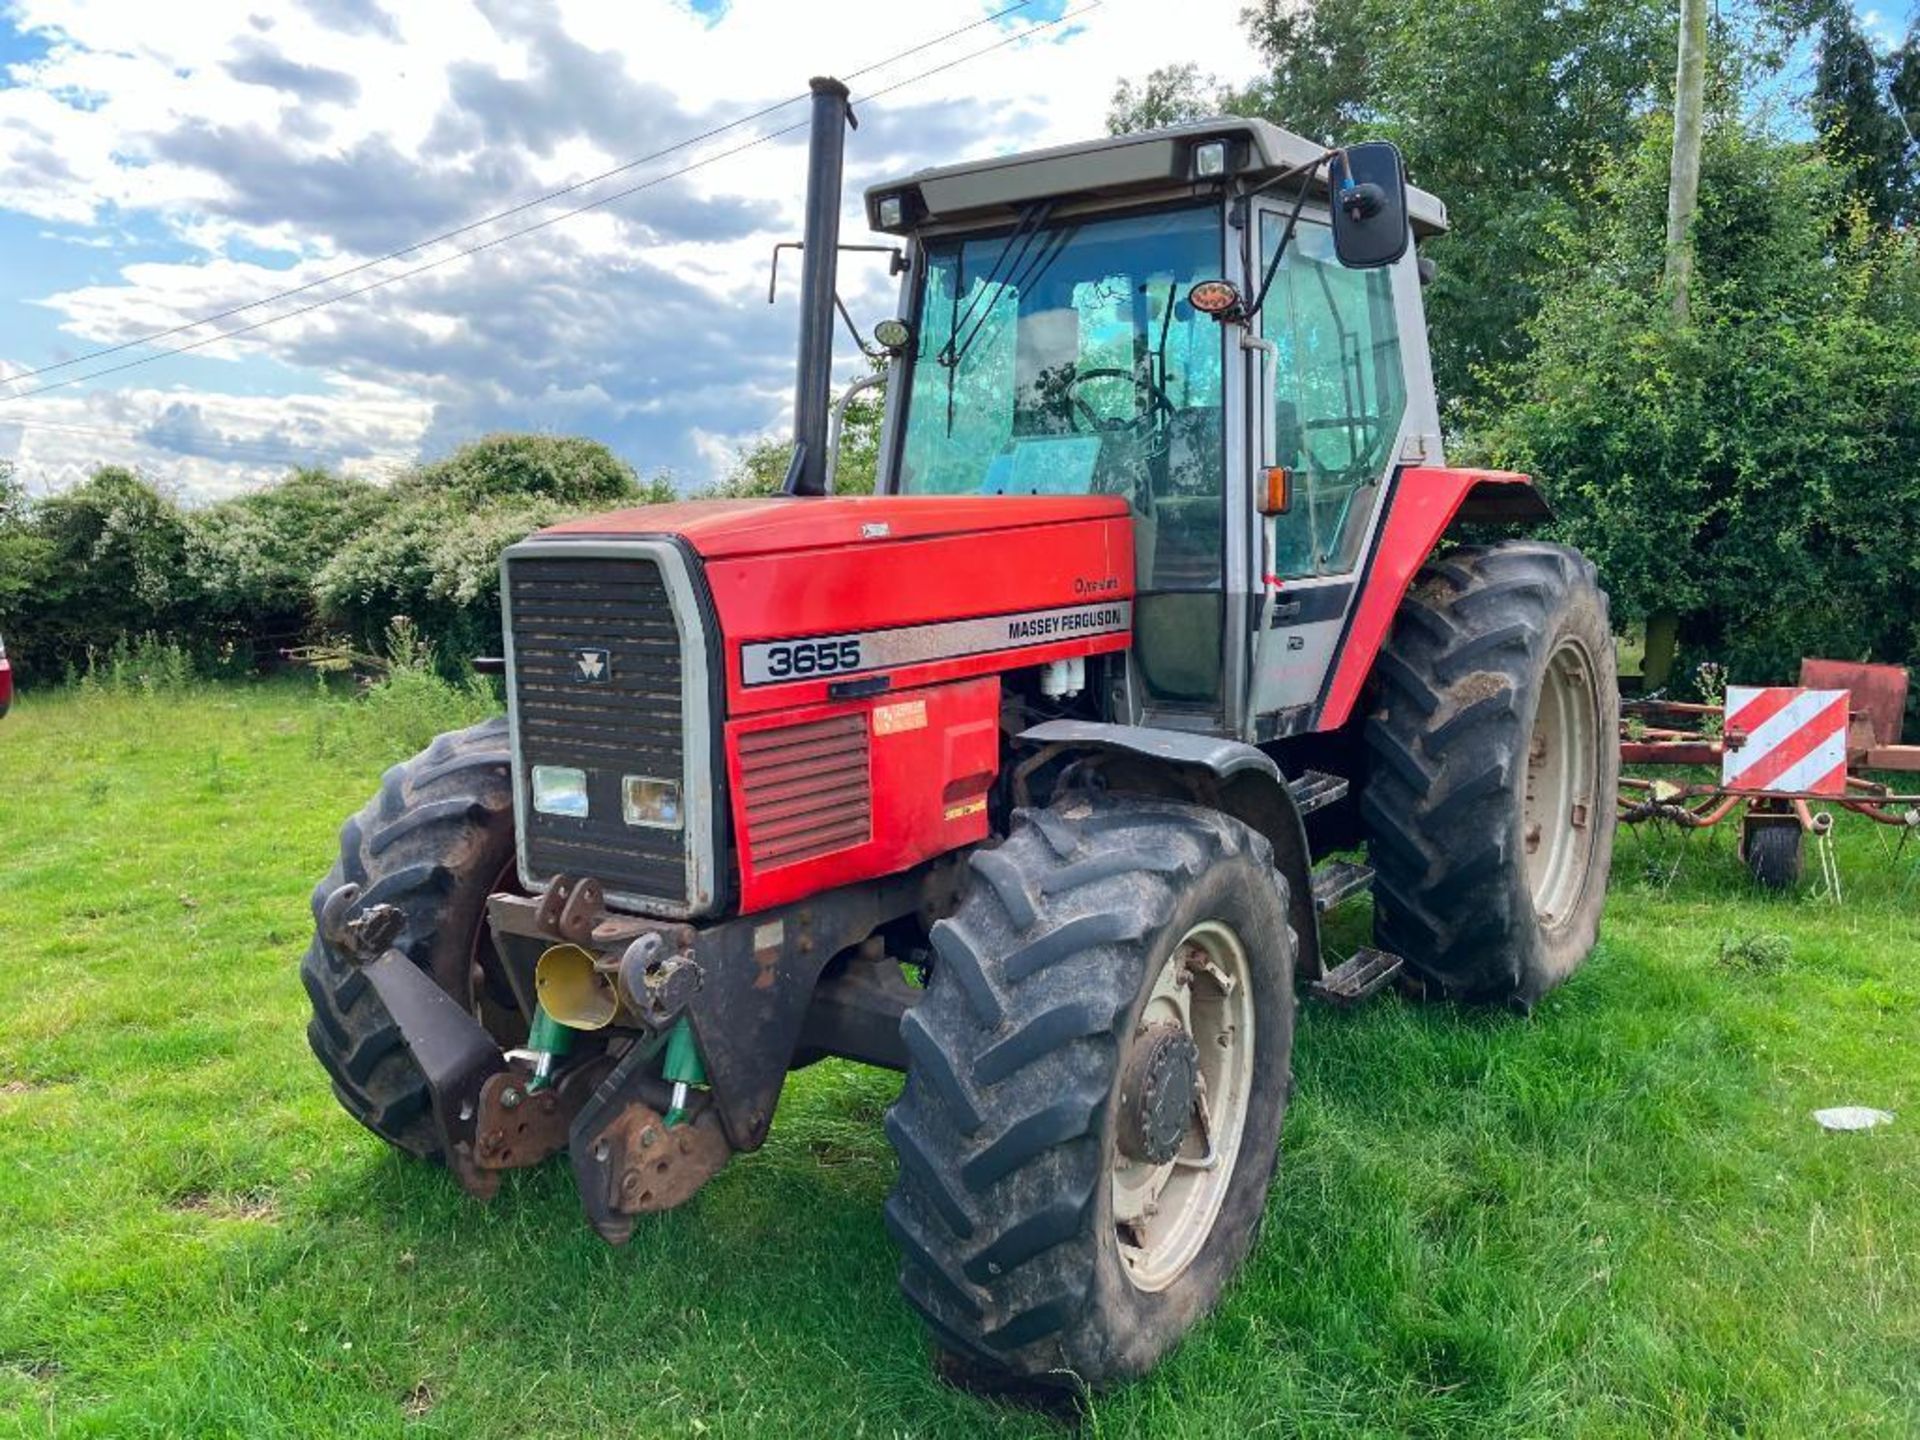 1995 Massey Ferguson 3655 Dynashift 4wd Datatronic tractor with 3 manual spools, front linkage and P - Image 11 of 23